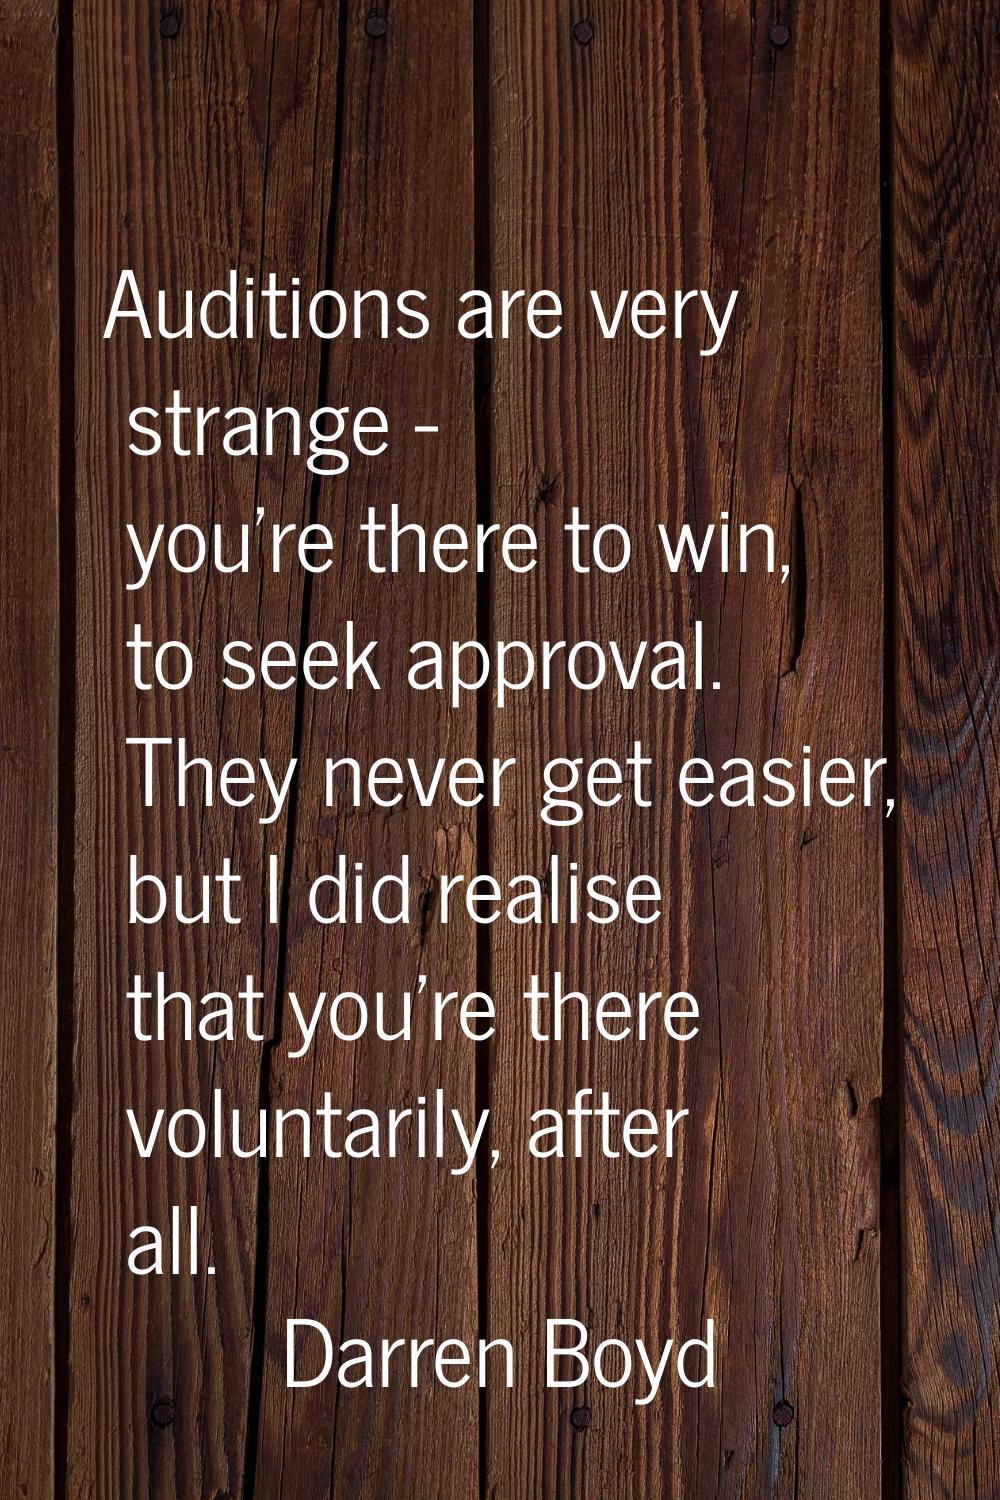 Auditions are very strange - you're there to win, to seek approval. They never get easier, but I di